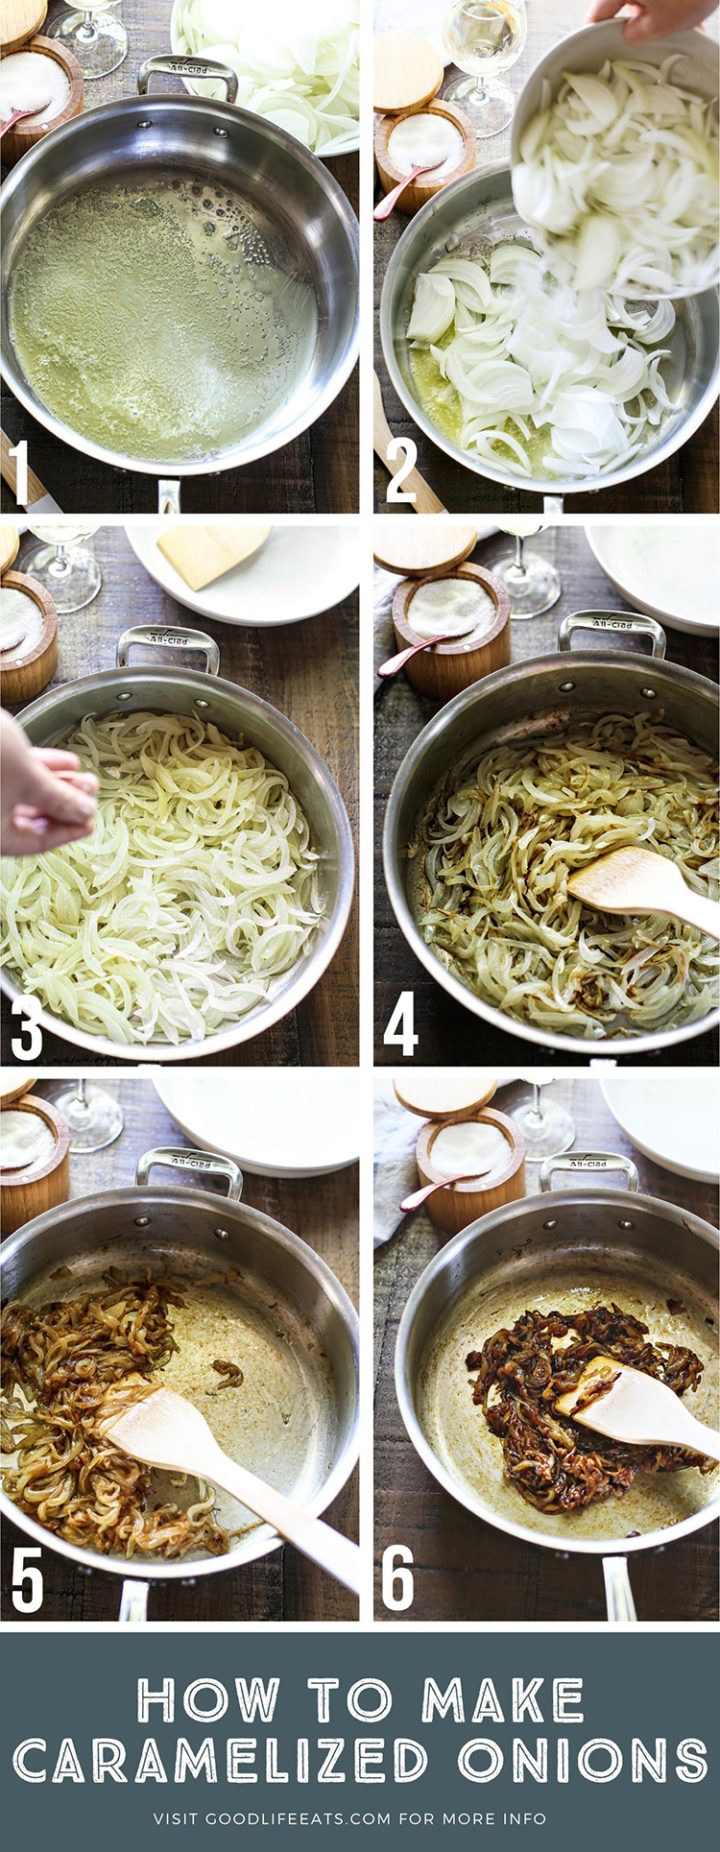 step by step photos of the process of caramelizing onions